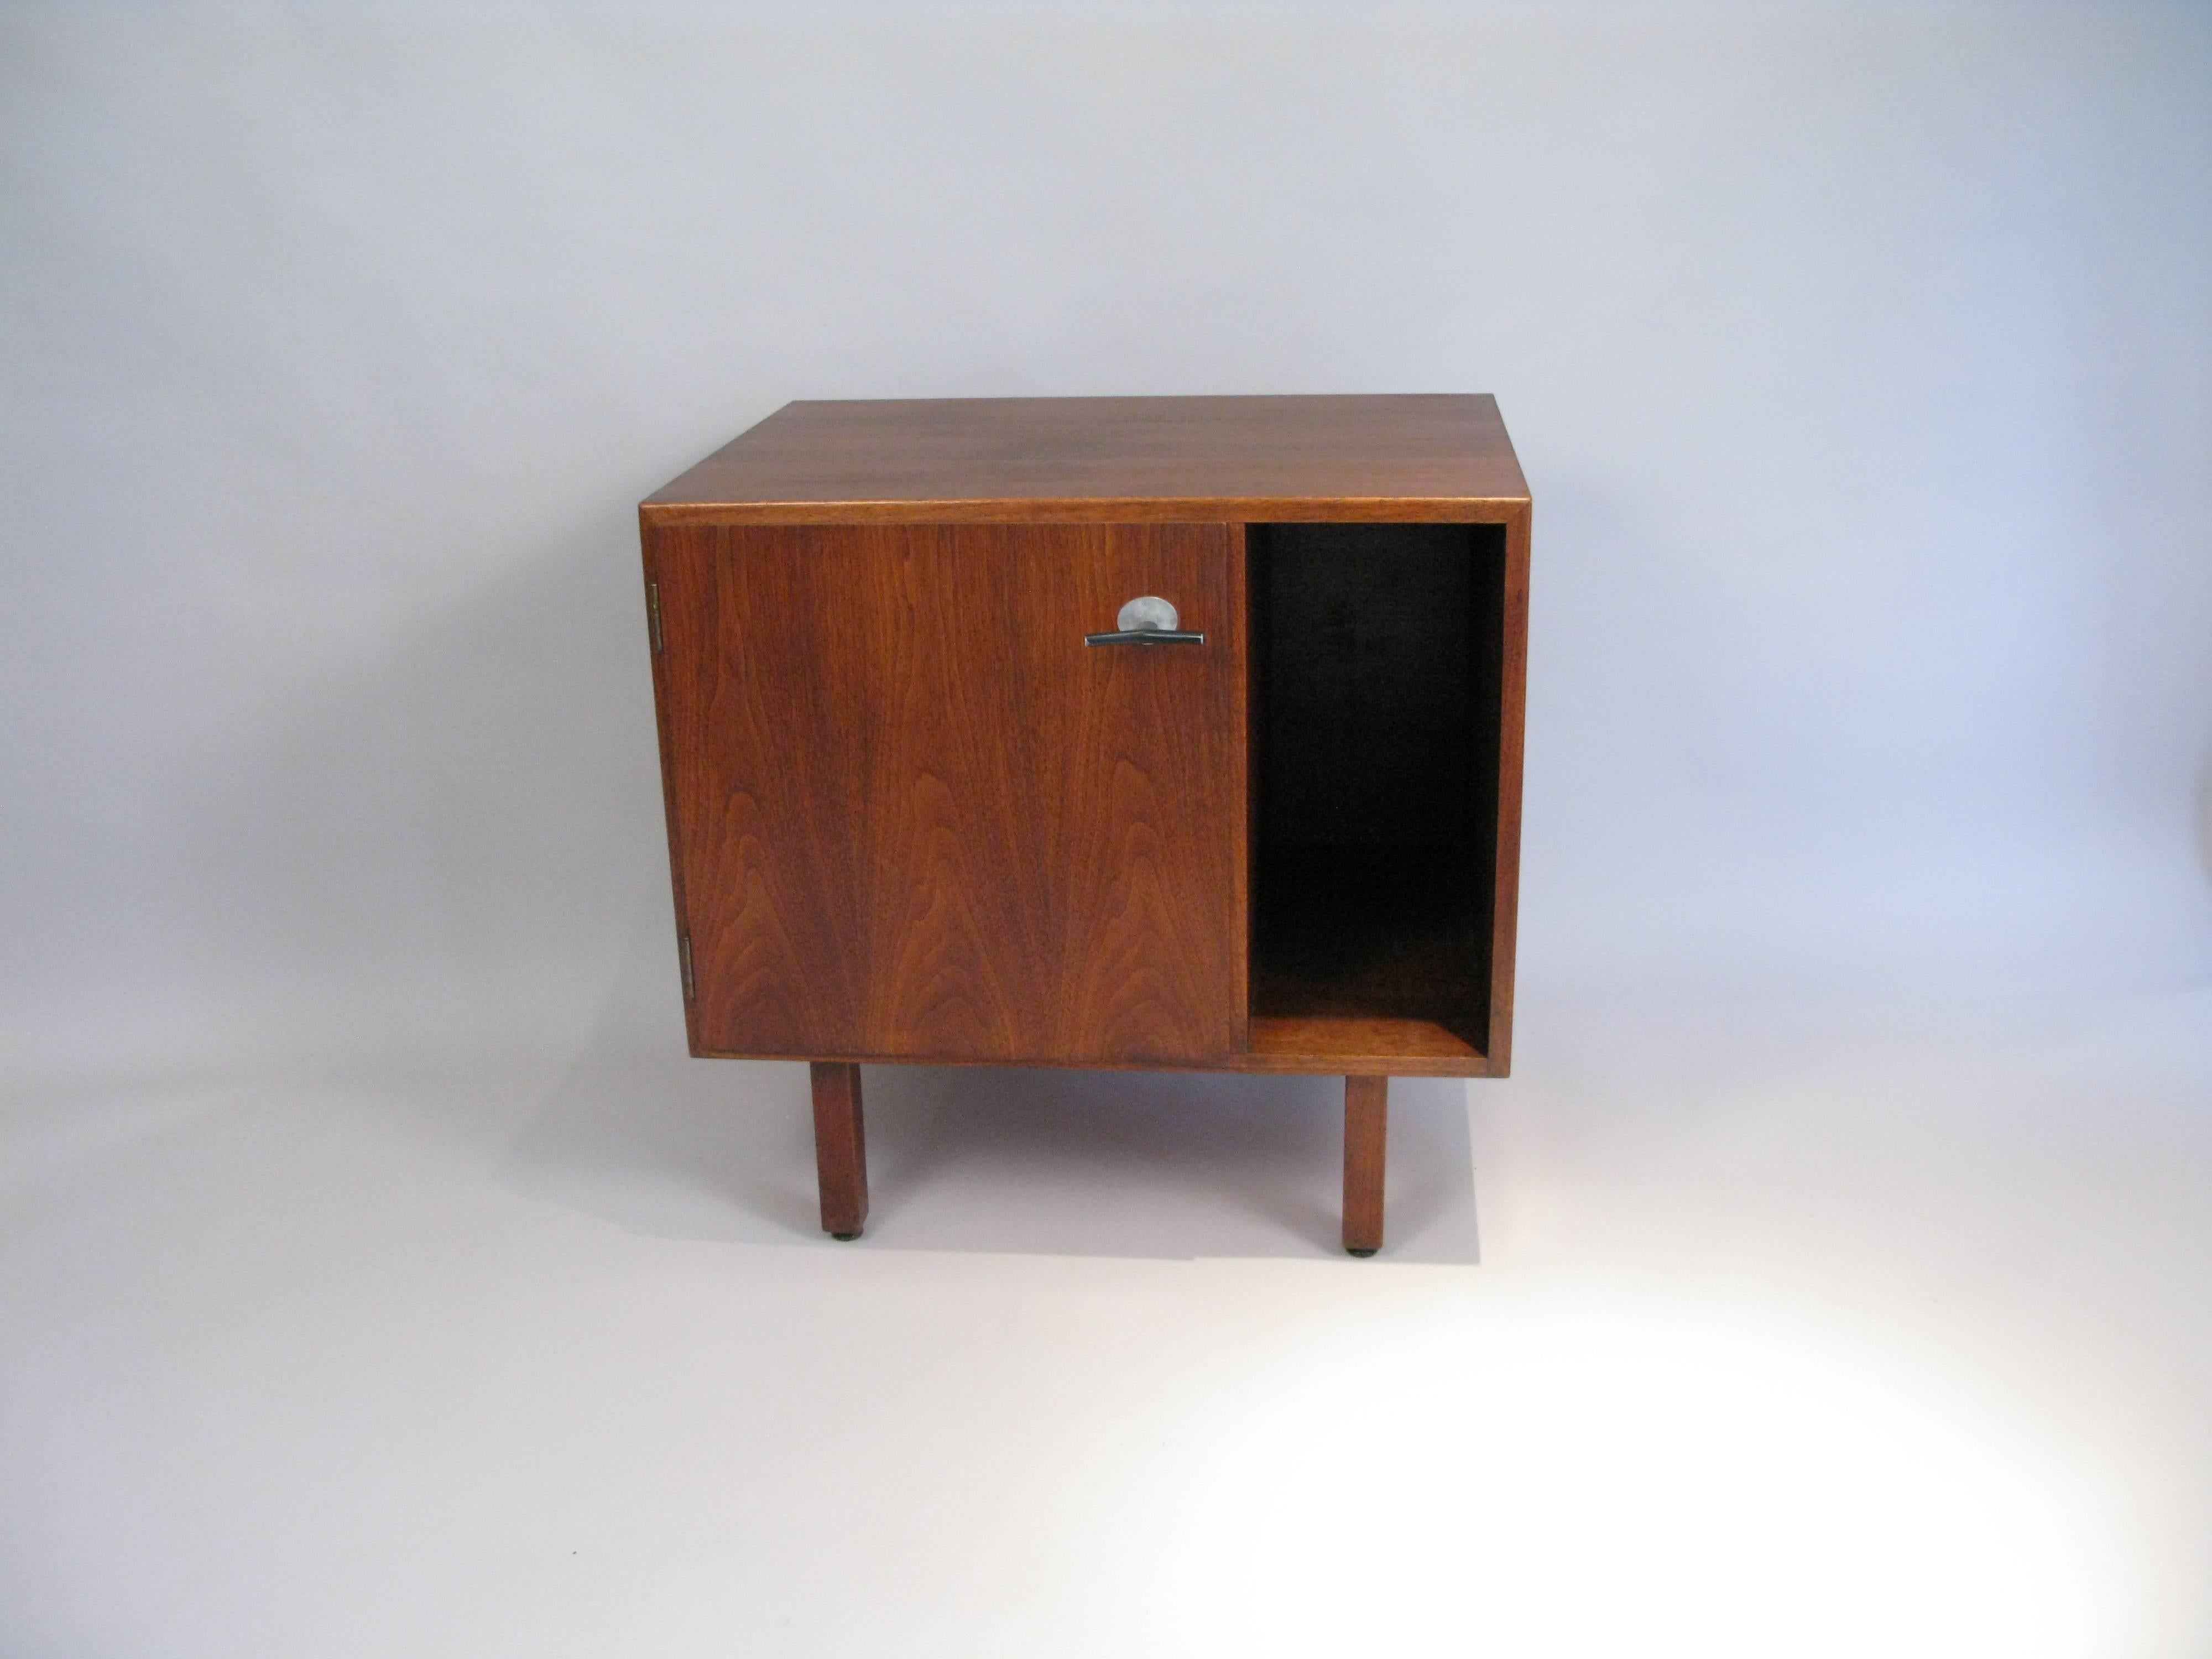 Midcentury 1960s walnut cabinet with storage designed by Jens Risom. Great for bedside. Finished on the back. The cabinet has been cleaned and polished.